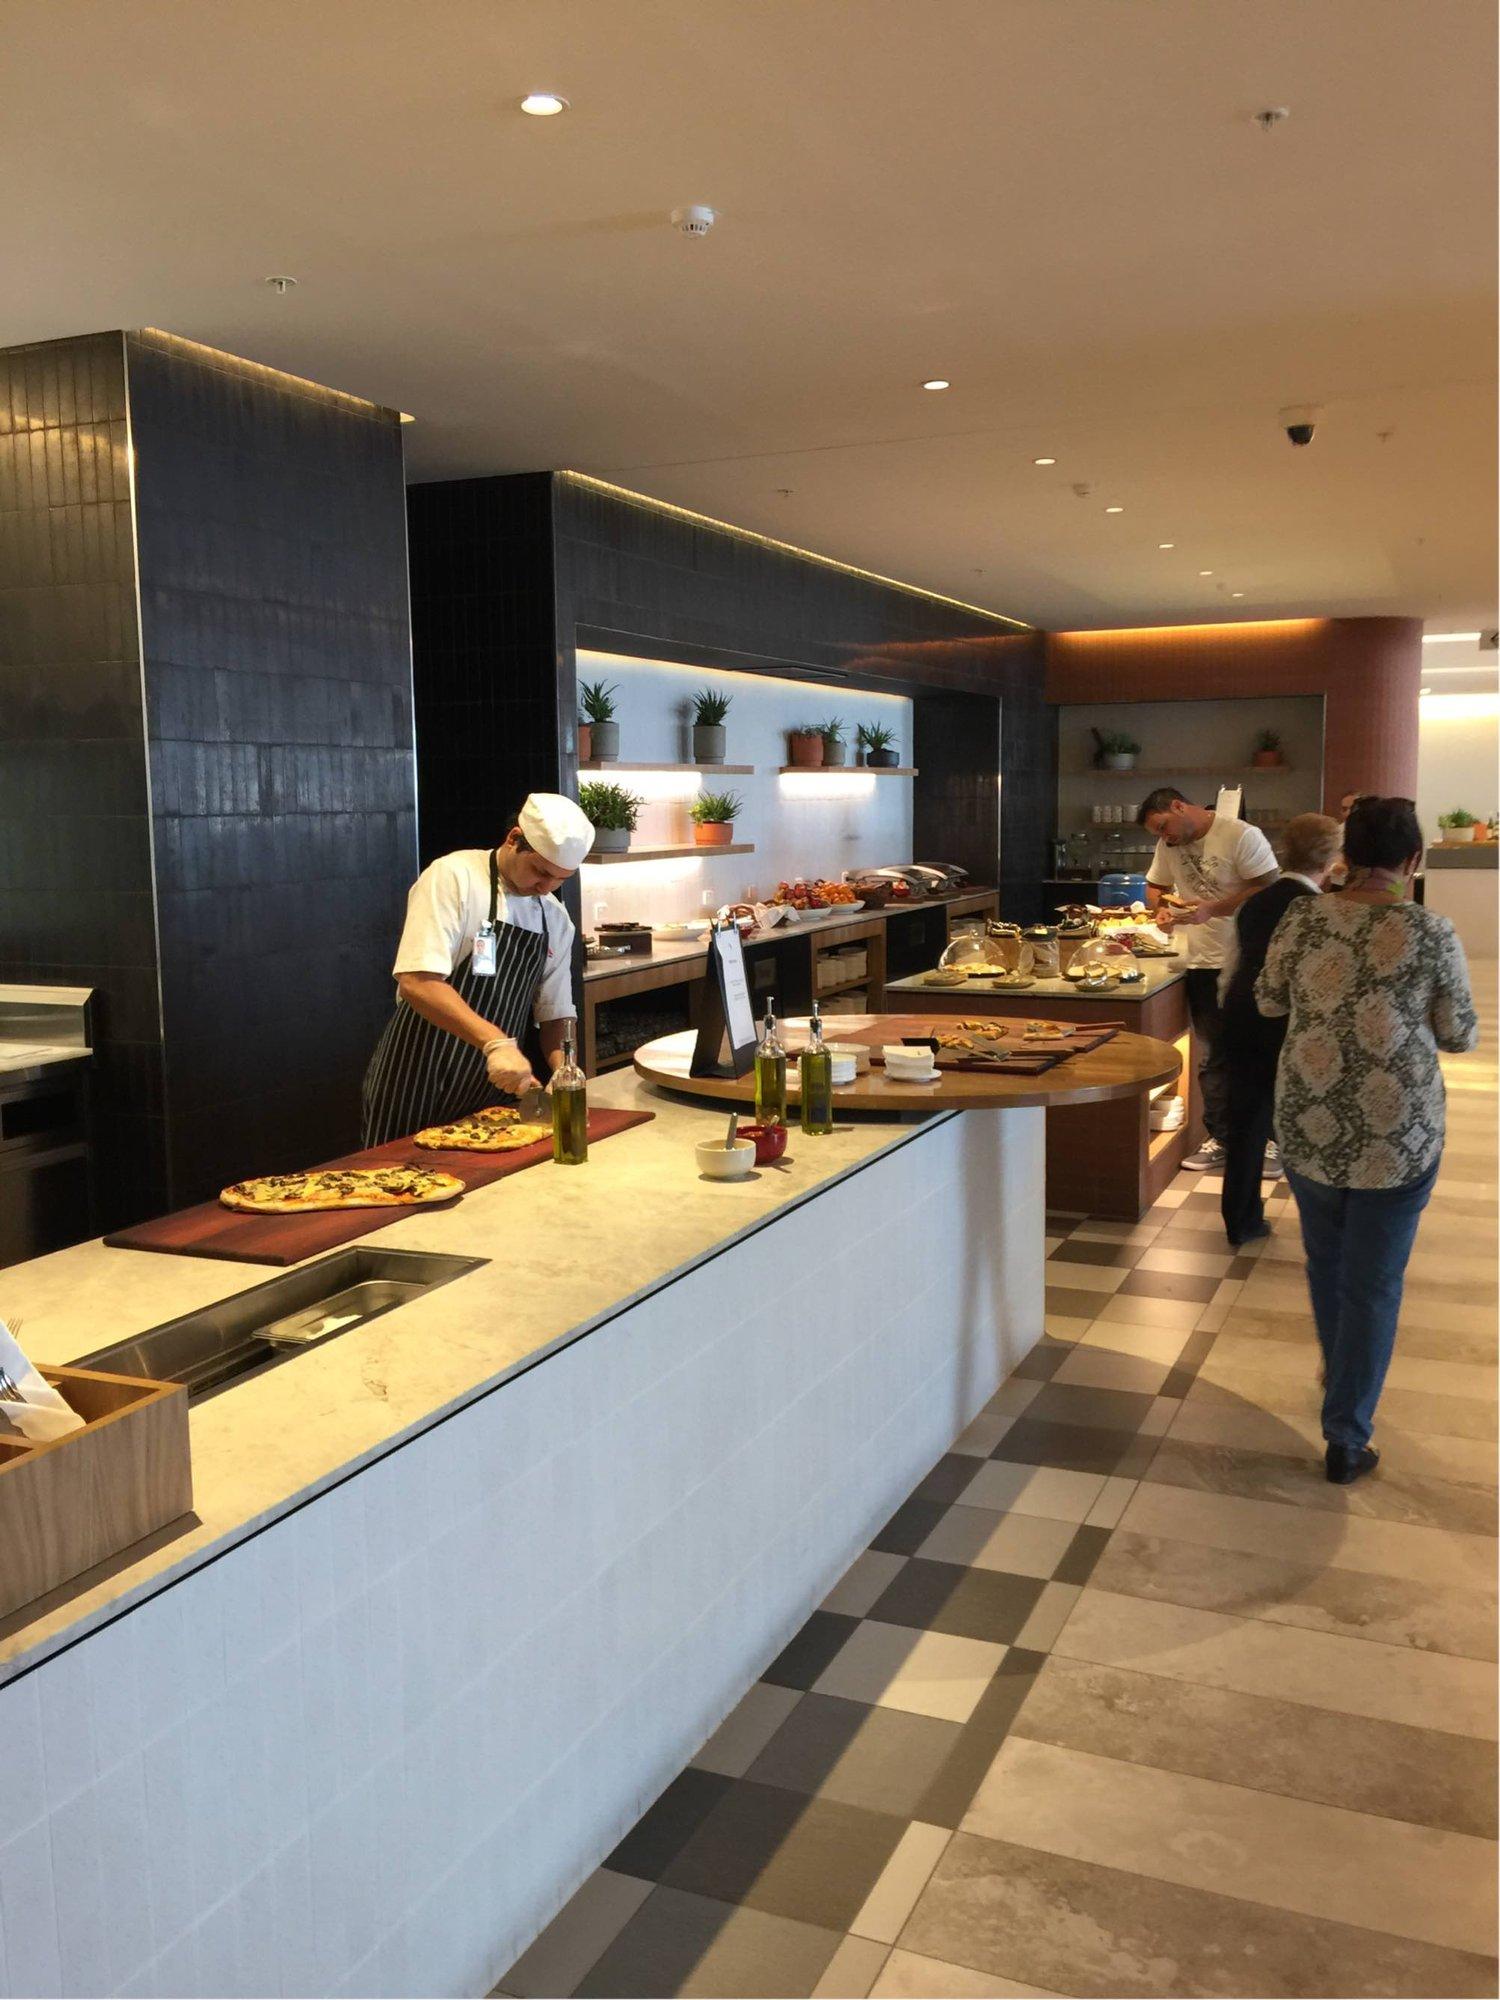 Qantas Airways Domestic and International Business Lounge image 3 of 5